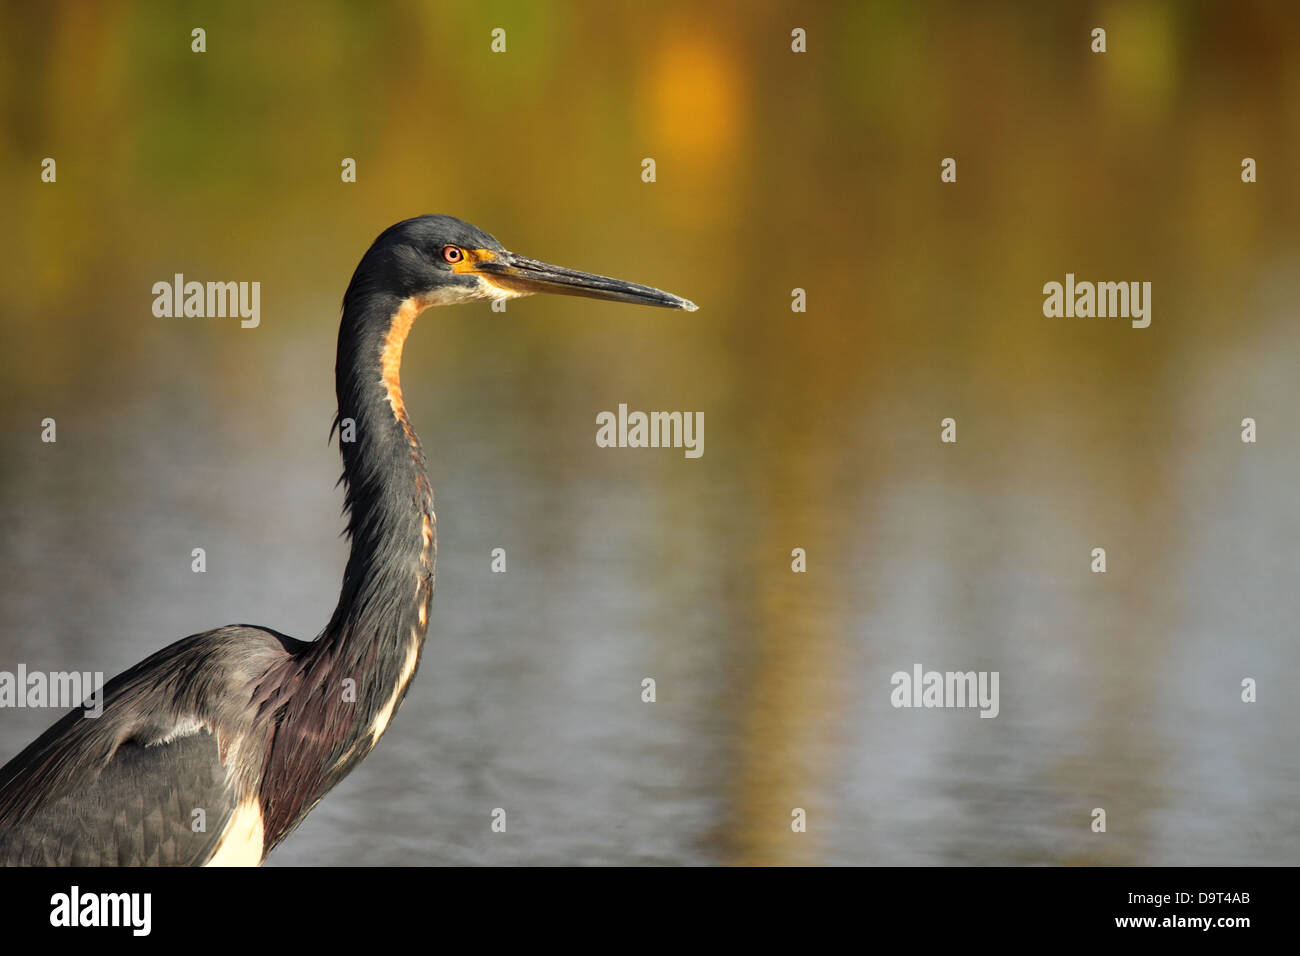 A Tri-colored Heron basking in the sun Stock Photo - Alamy